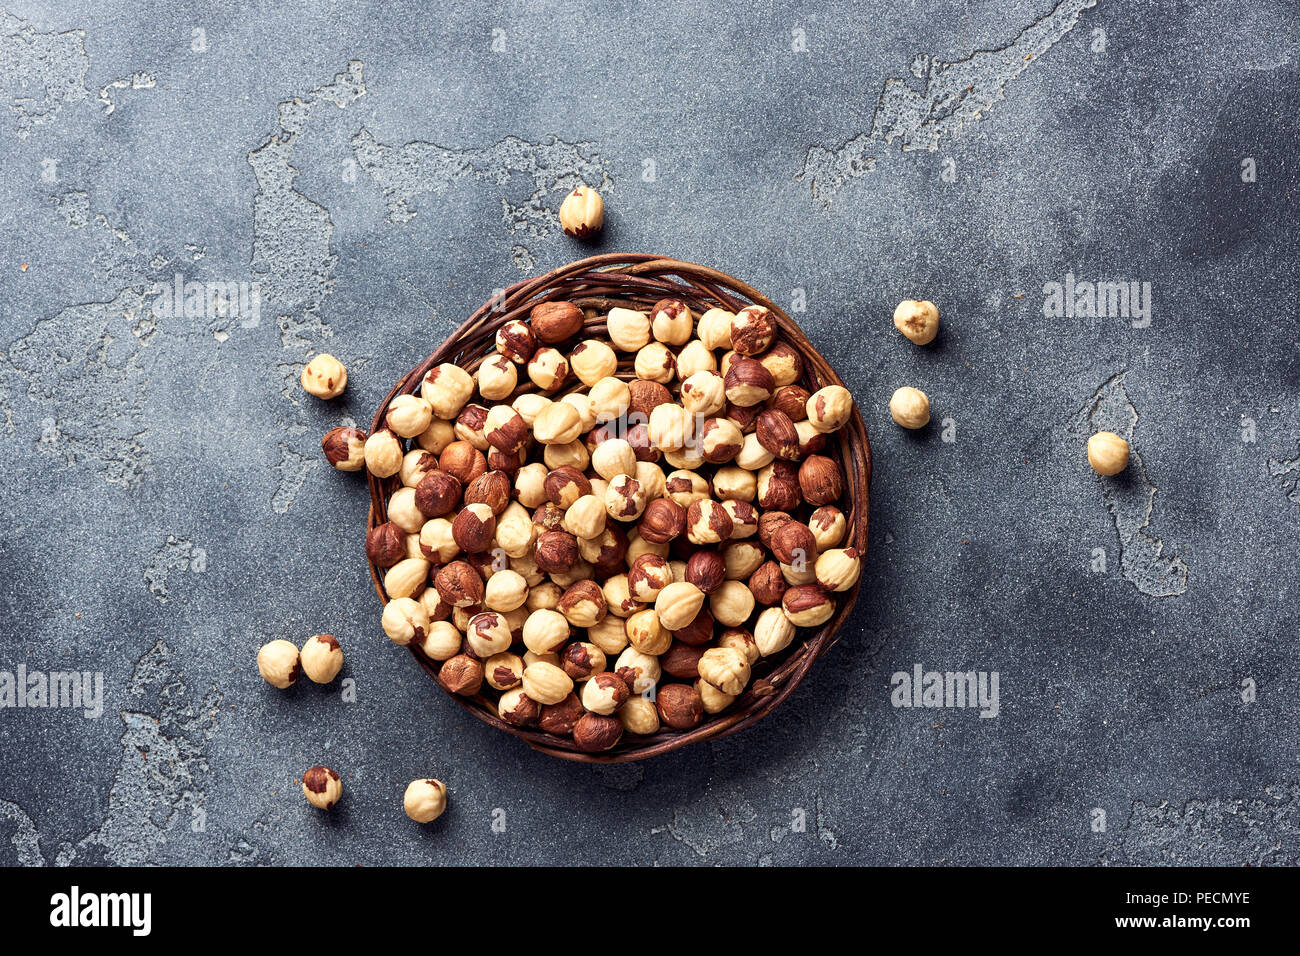 Hazelnuts on gray background. Top view. Stock Photo